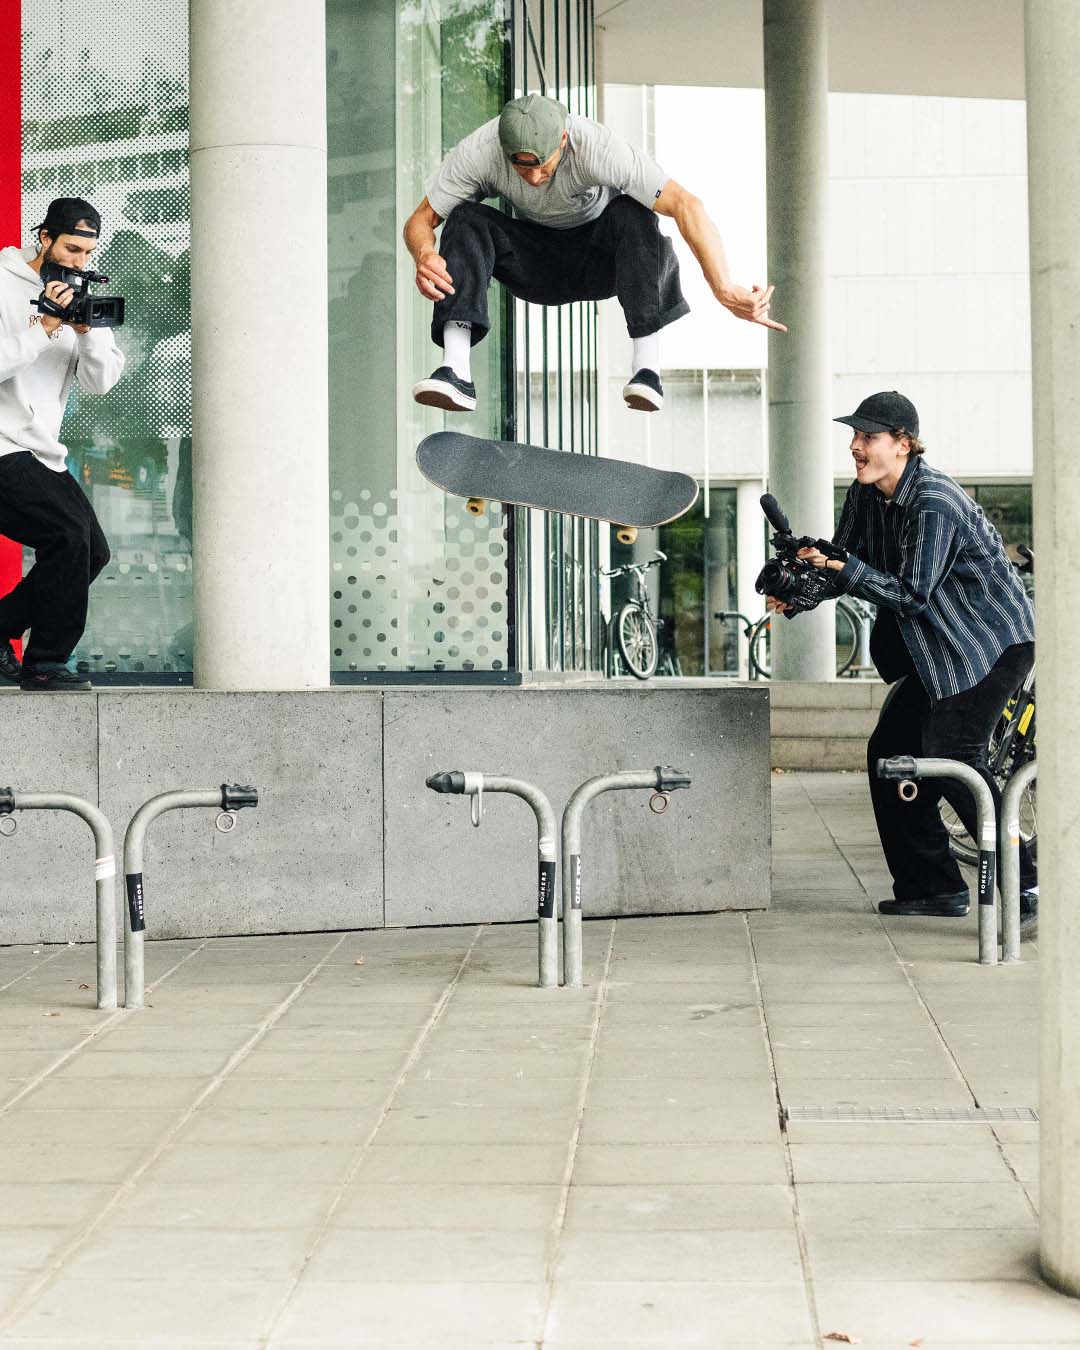 Still photo of skateboarder Marcel Weber doing a Frontside Kickflip down a gap while two videographers are capturing the trick.